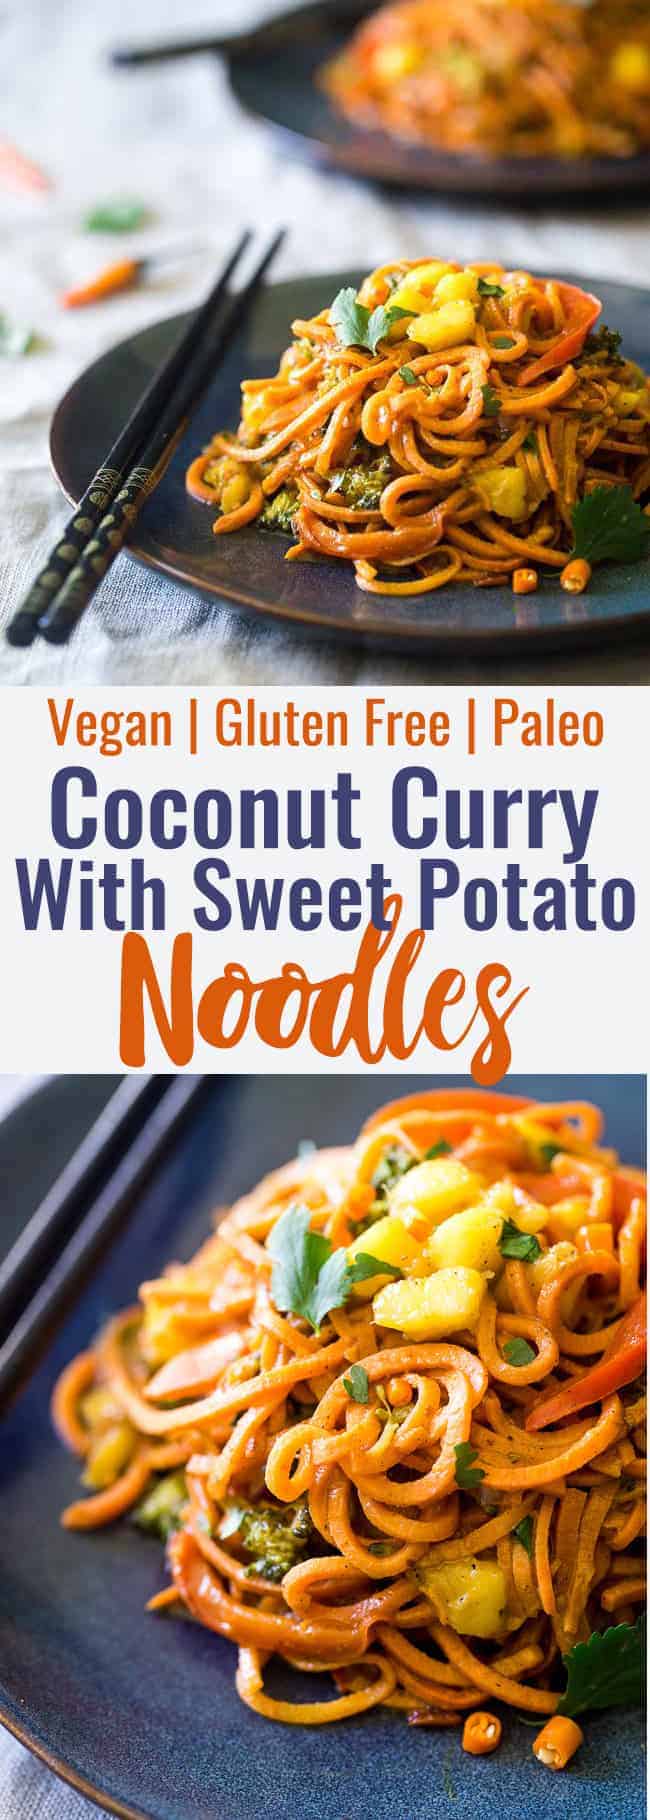 Vegan Coconut Sweet Potato Curry with Sweet Potato Noodles – This curry is ULTRA creamy and loaded with veggies, for a quick and SO easy, healthy dinner that is gluten free, vegan and paleo friendly! This has RAVE reader reviews! | #FoodFaithFitness | #Glutenfree #Vegan #Paleo #Dairyfree #Healthy